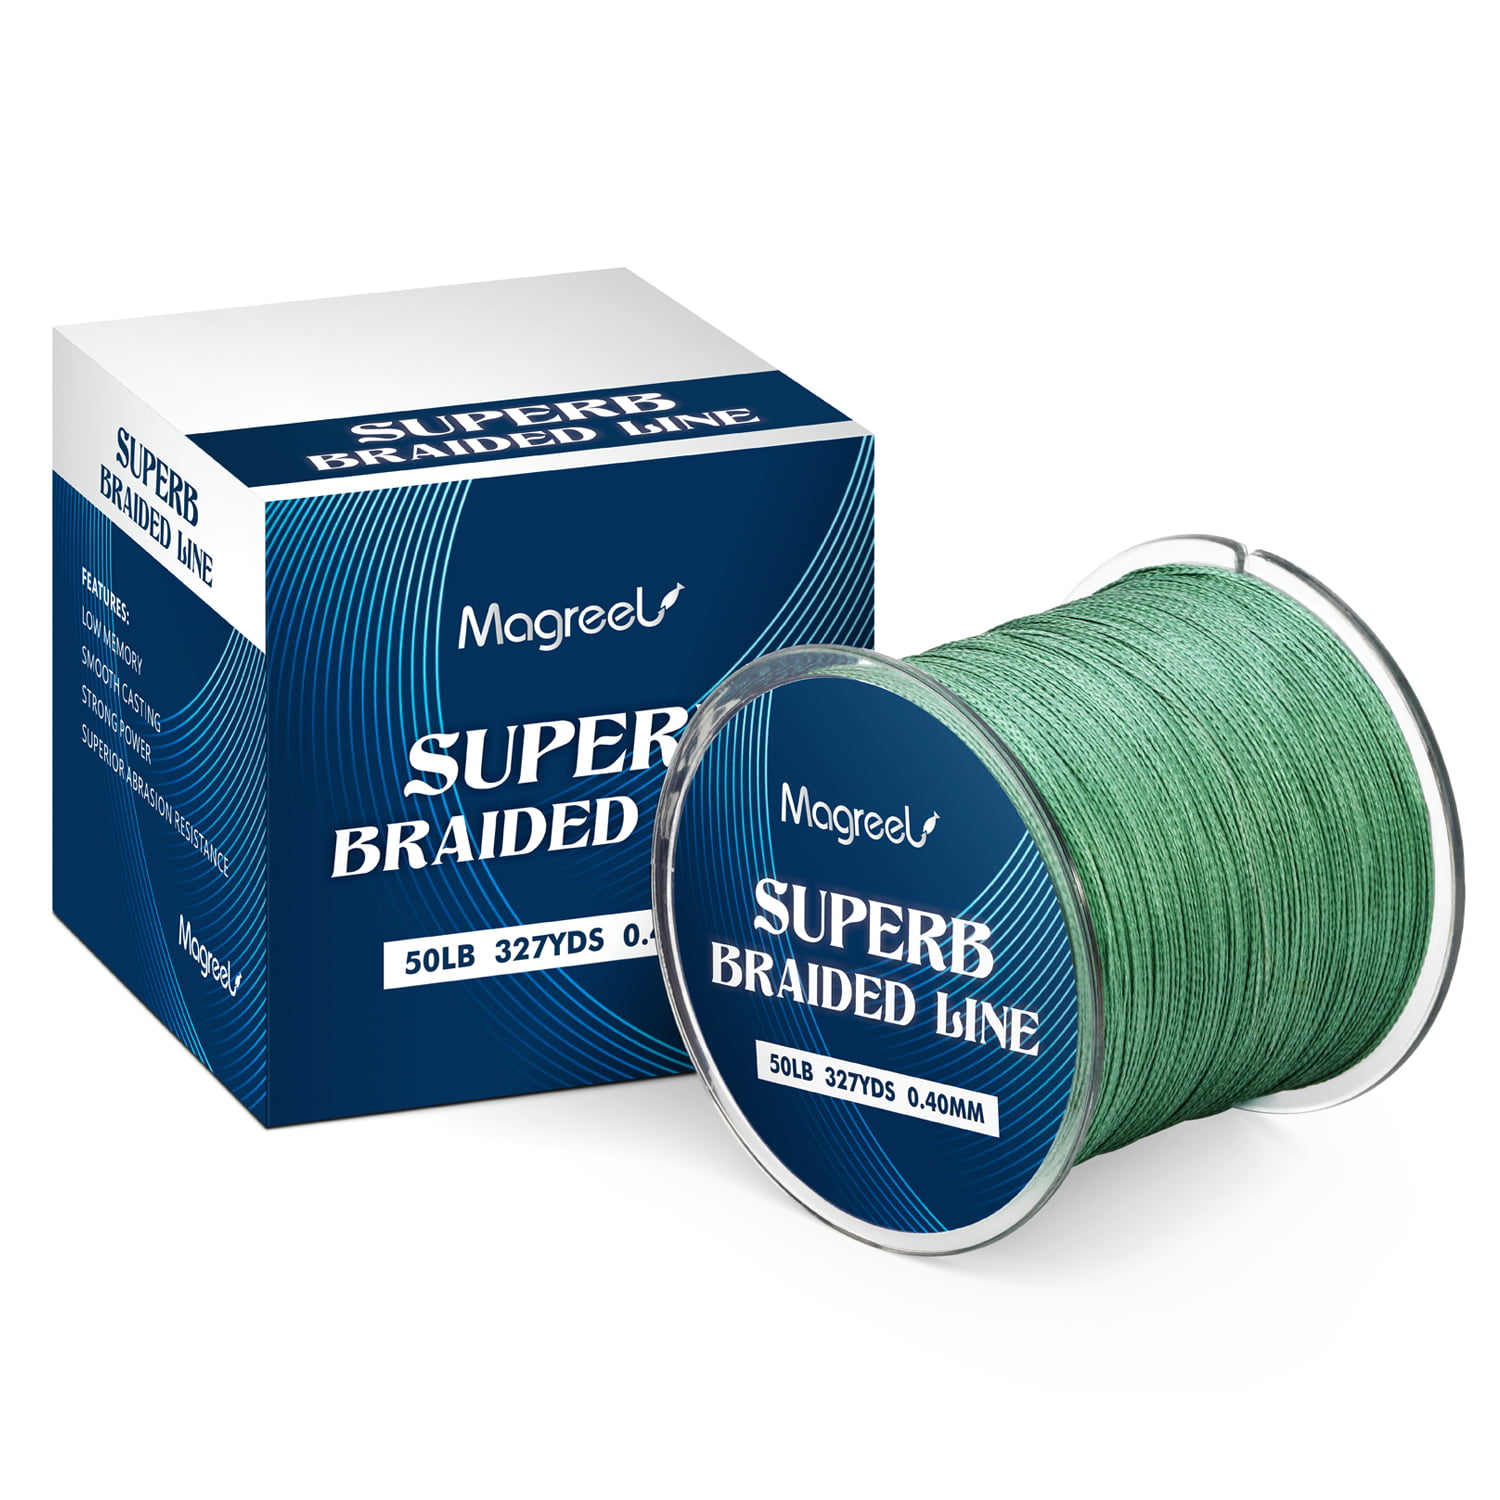 Magreel Braided Fishing Line Abrasion Resistant Braided Lines High Performance Strong 4 or 8 Strand Superline Smaller Diameter Zero Stretch,6lb-80lb,327Yards,Green/Low-Vis 